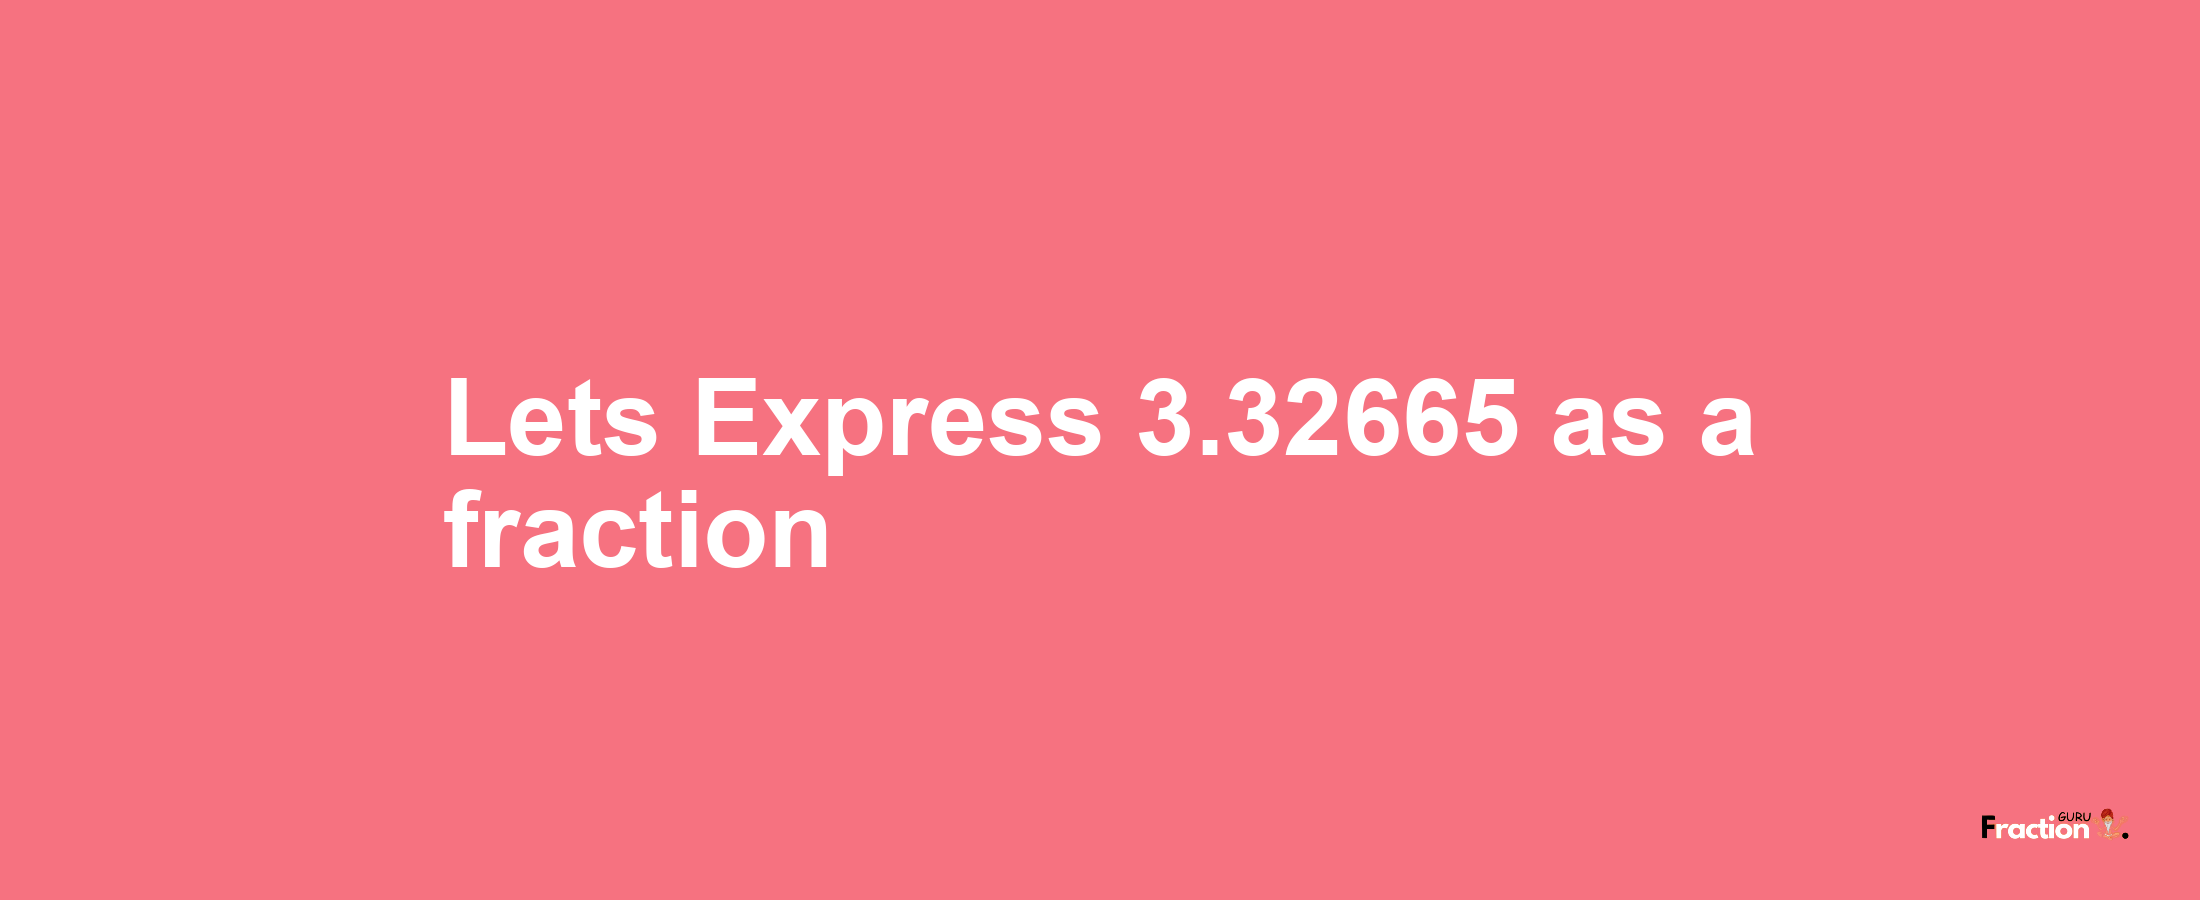 Lets Express 3.32665 as afraction